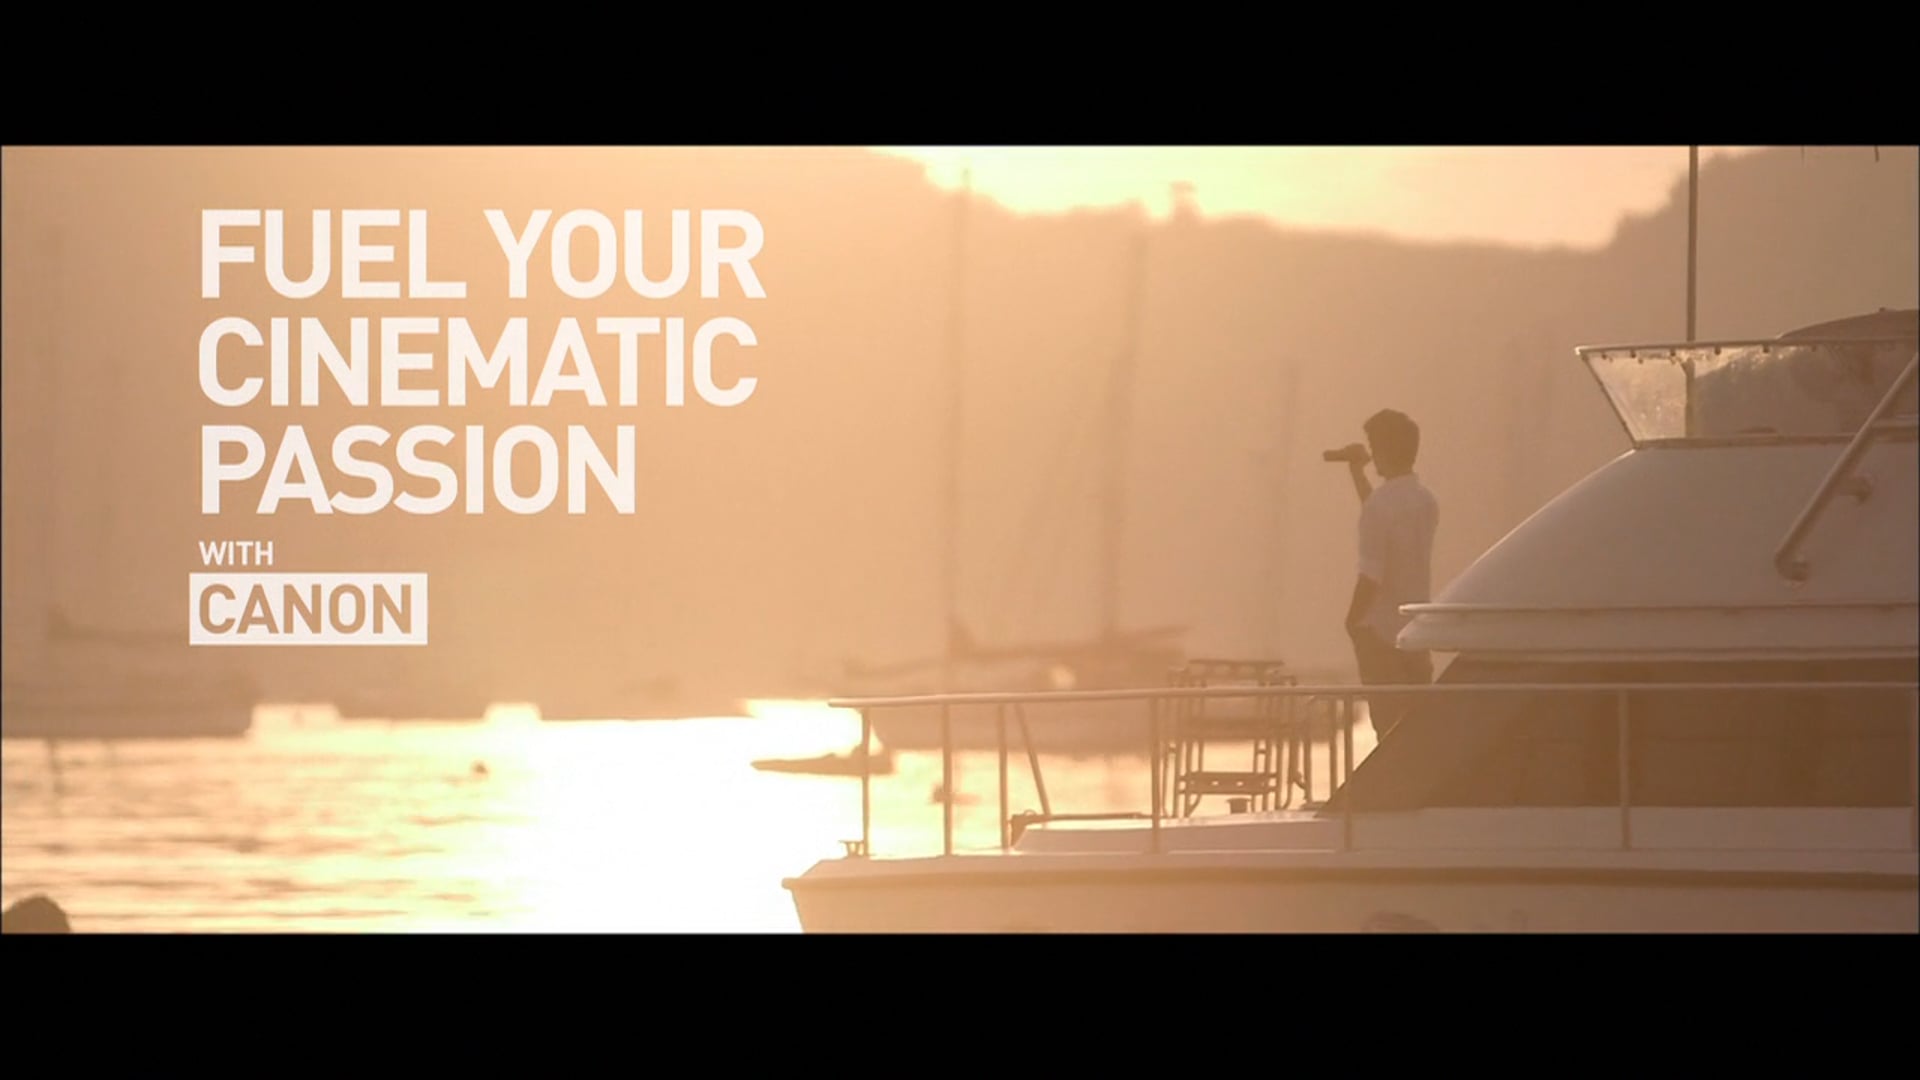 Canon "Fuel Your Cinematic Passion"